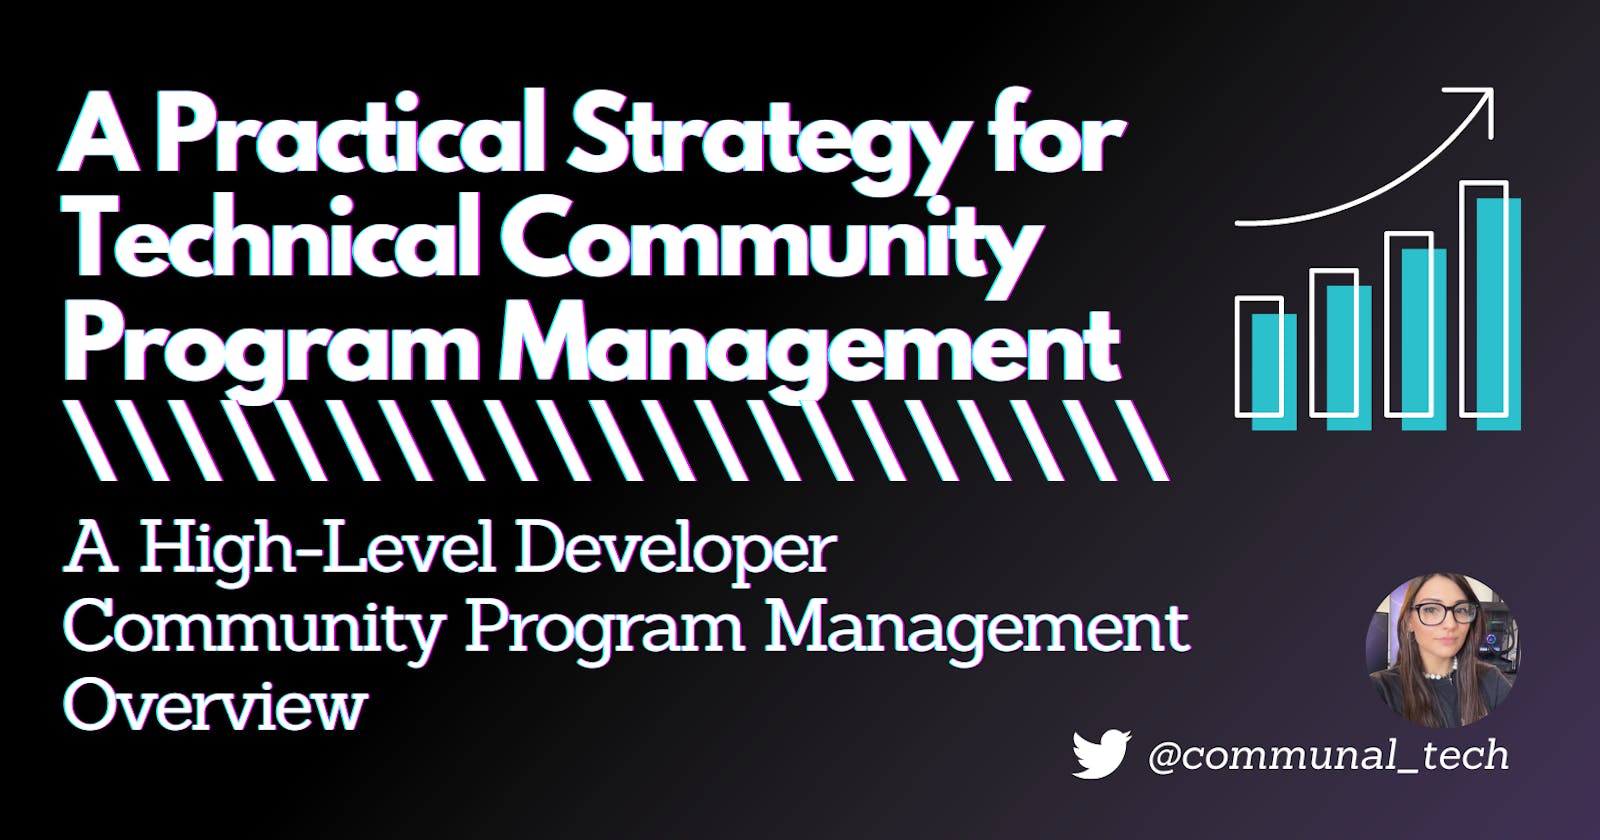 A Practical Strategy for Technical Community Program Management